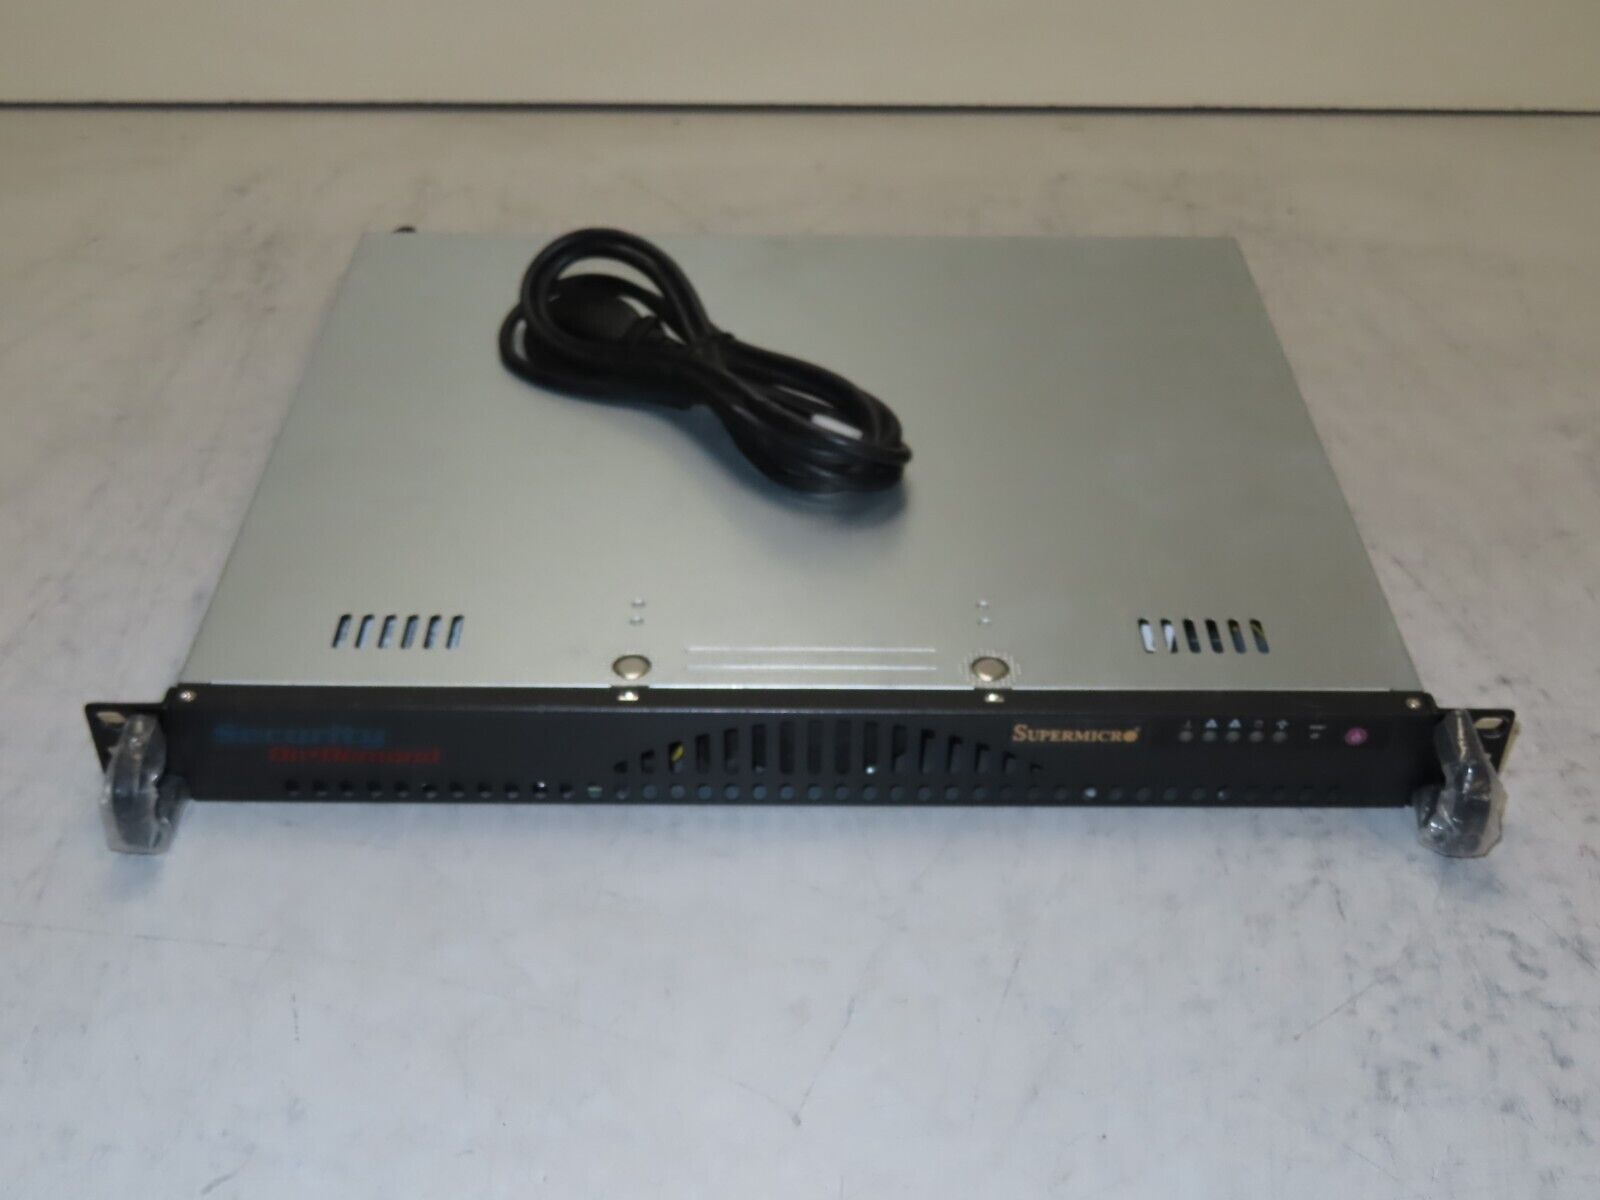 SuperMicro UXS Server 1U Open Source Firewall Router * Security on Demand* PARTS